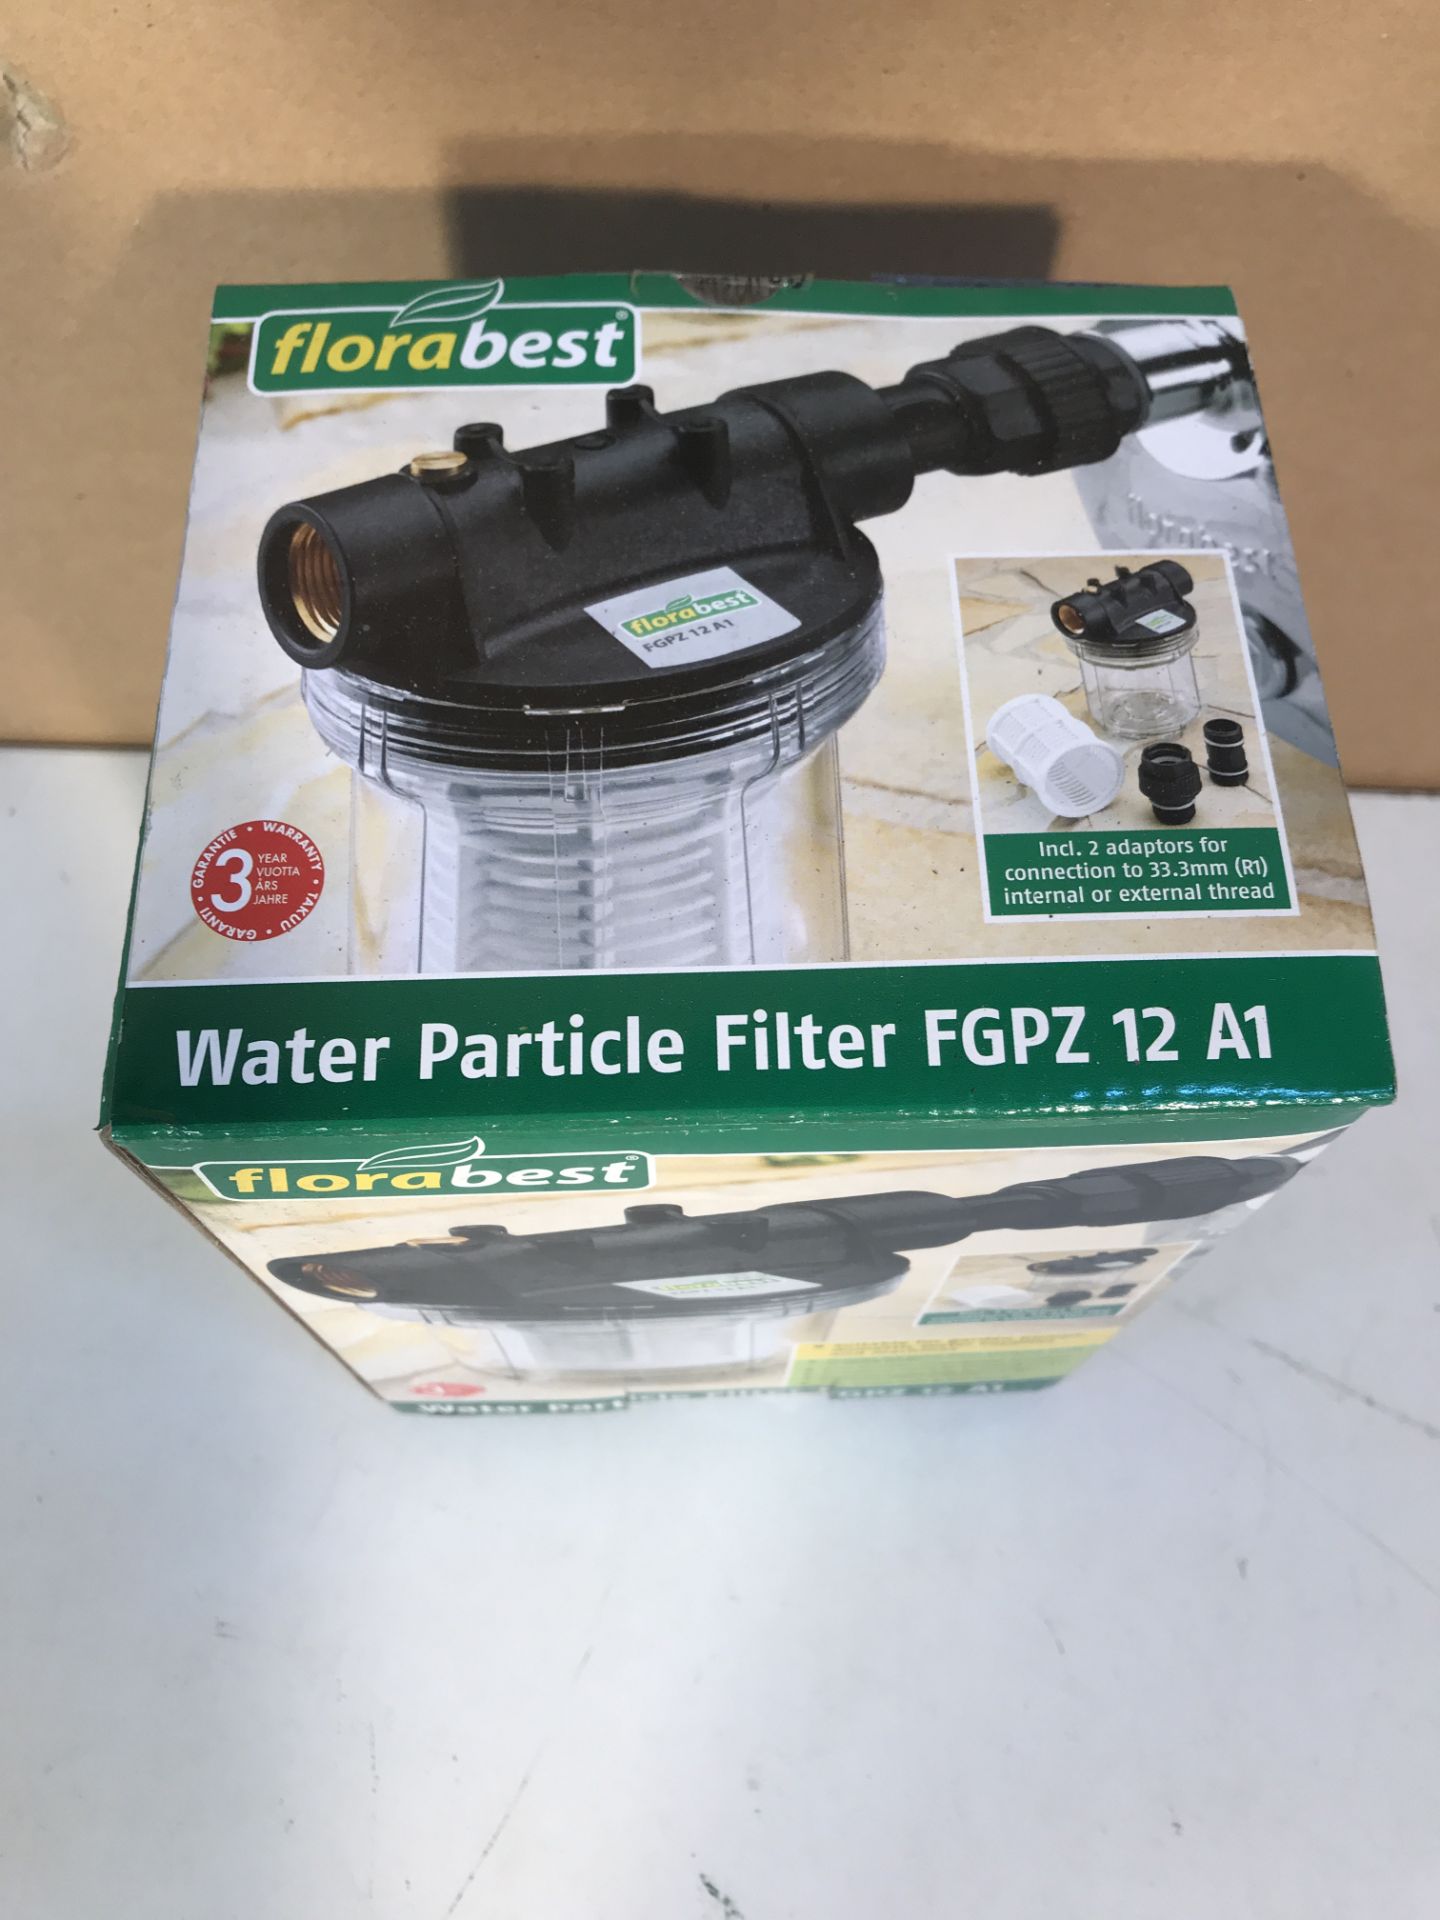 2 x Florabest Water Particle Filter FGPZ 12 A1 - Image 5 of 5